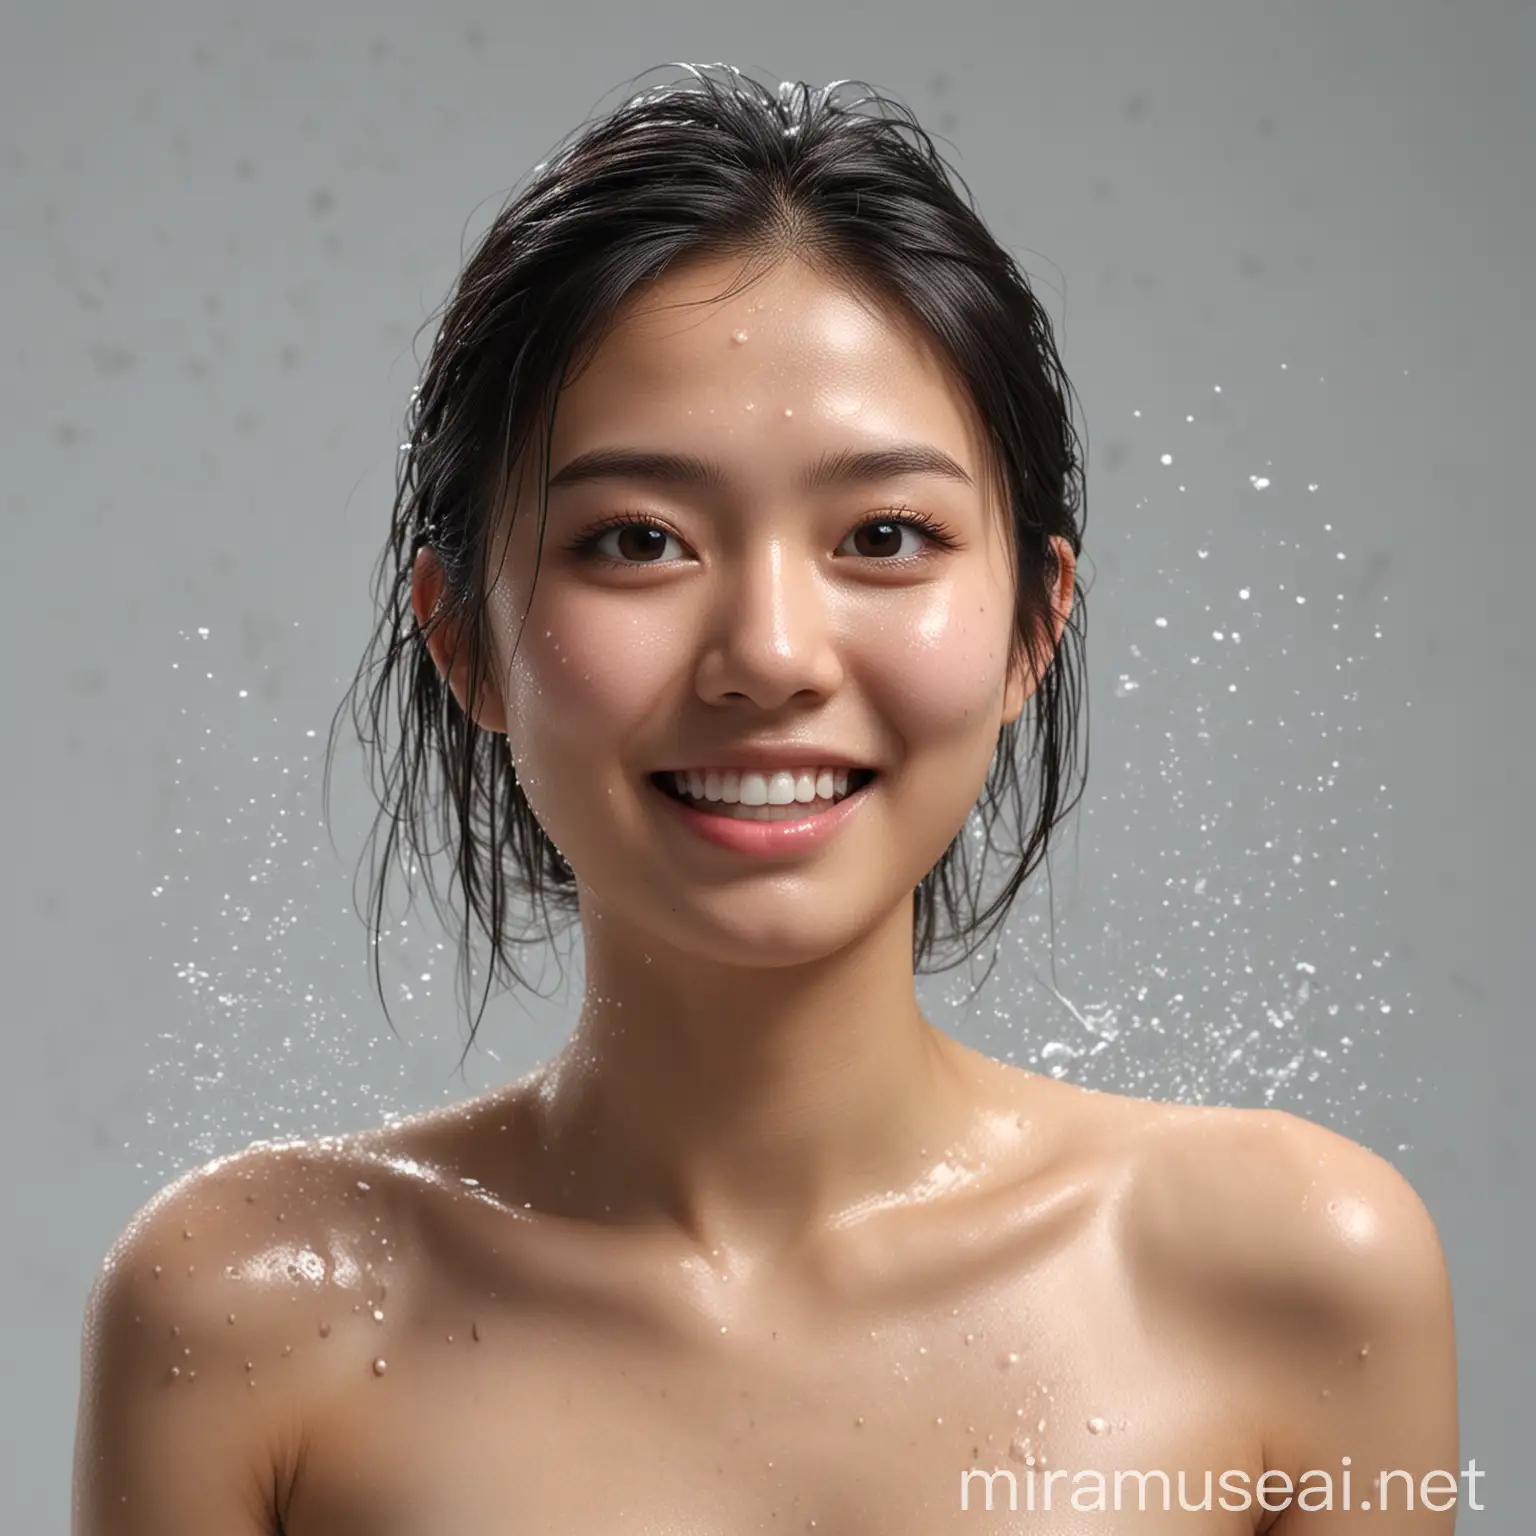 Young Taiwanese Woman Bathing and Smiling with Curiosity